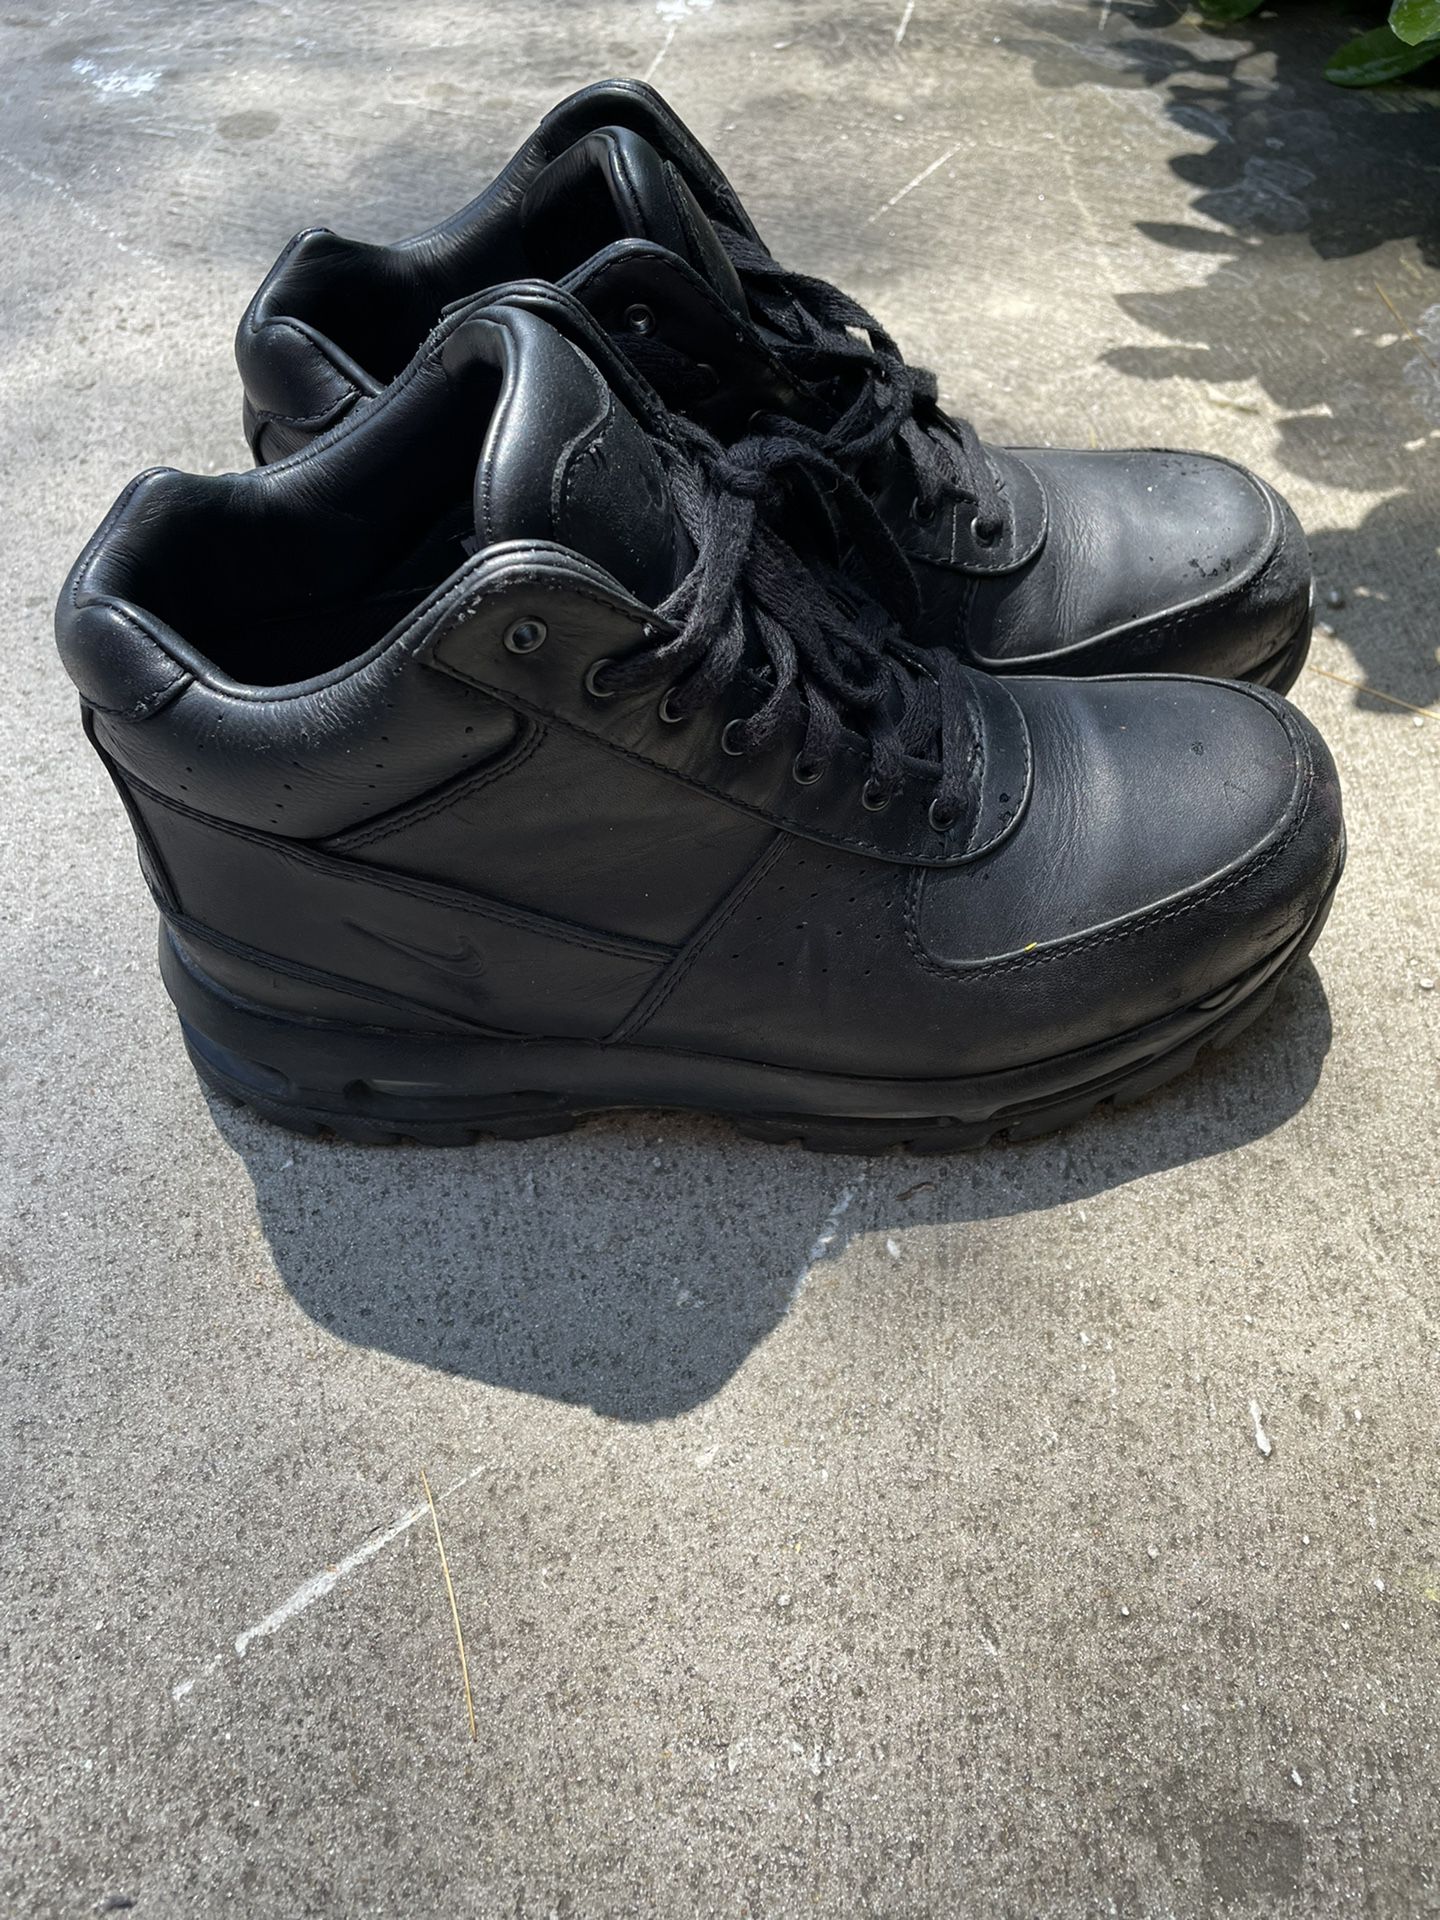 ACG Nike Boots 